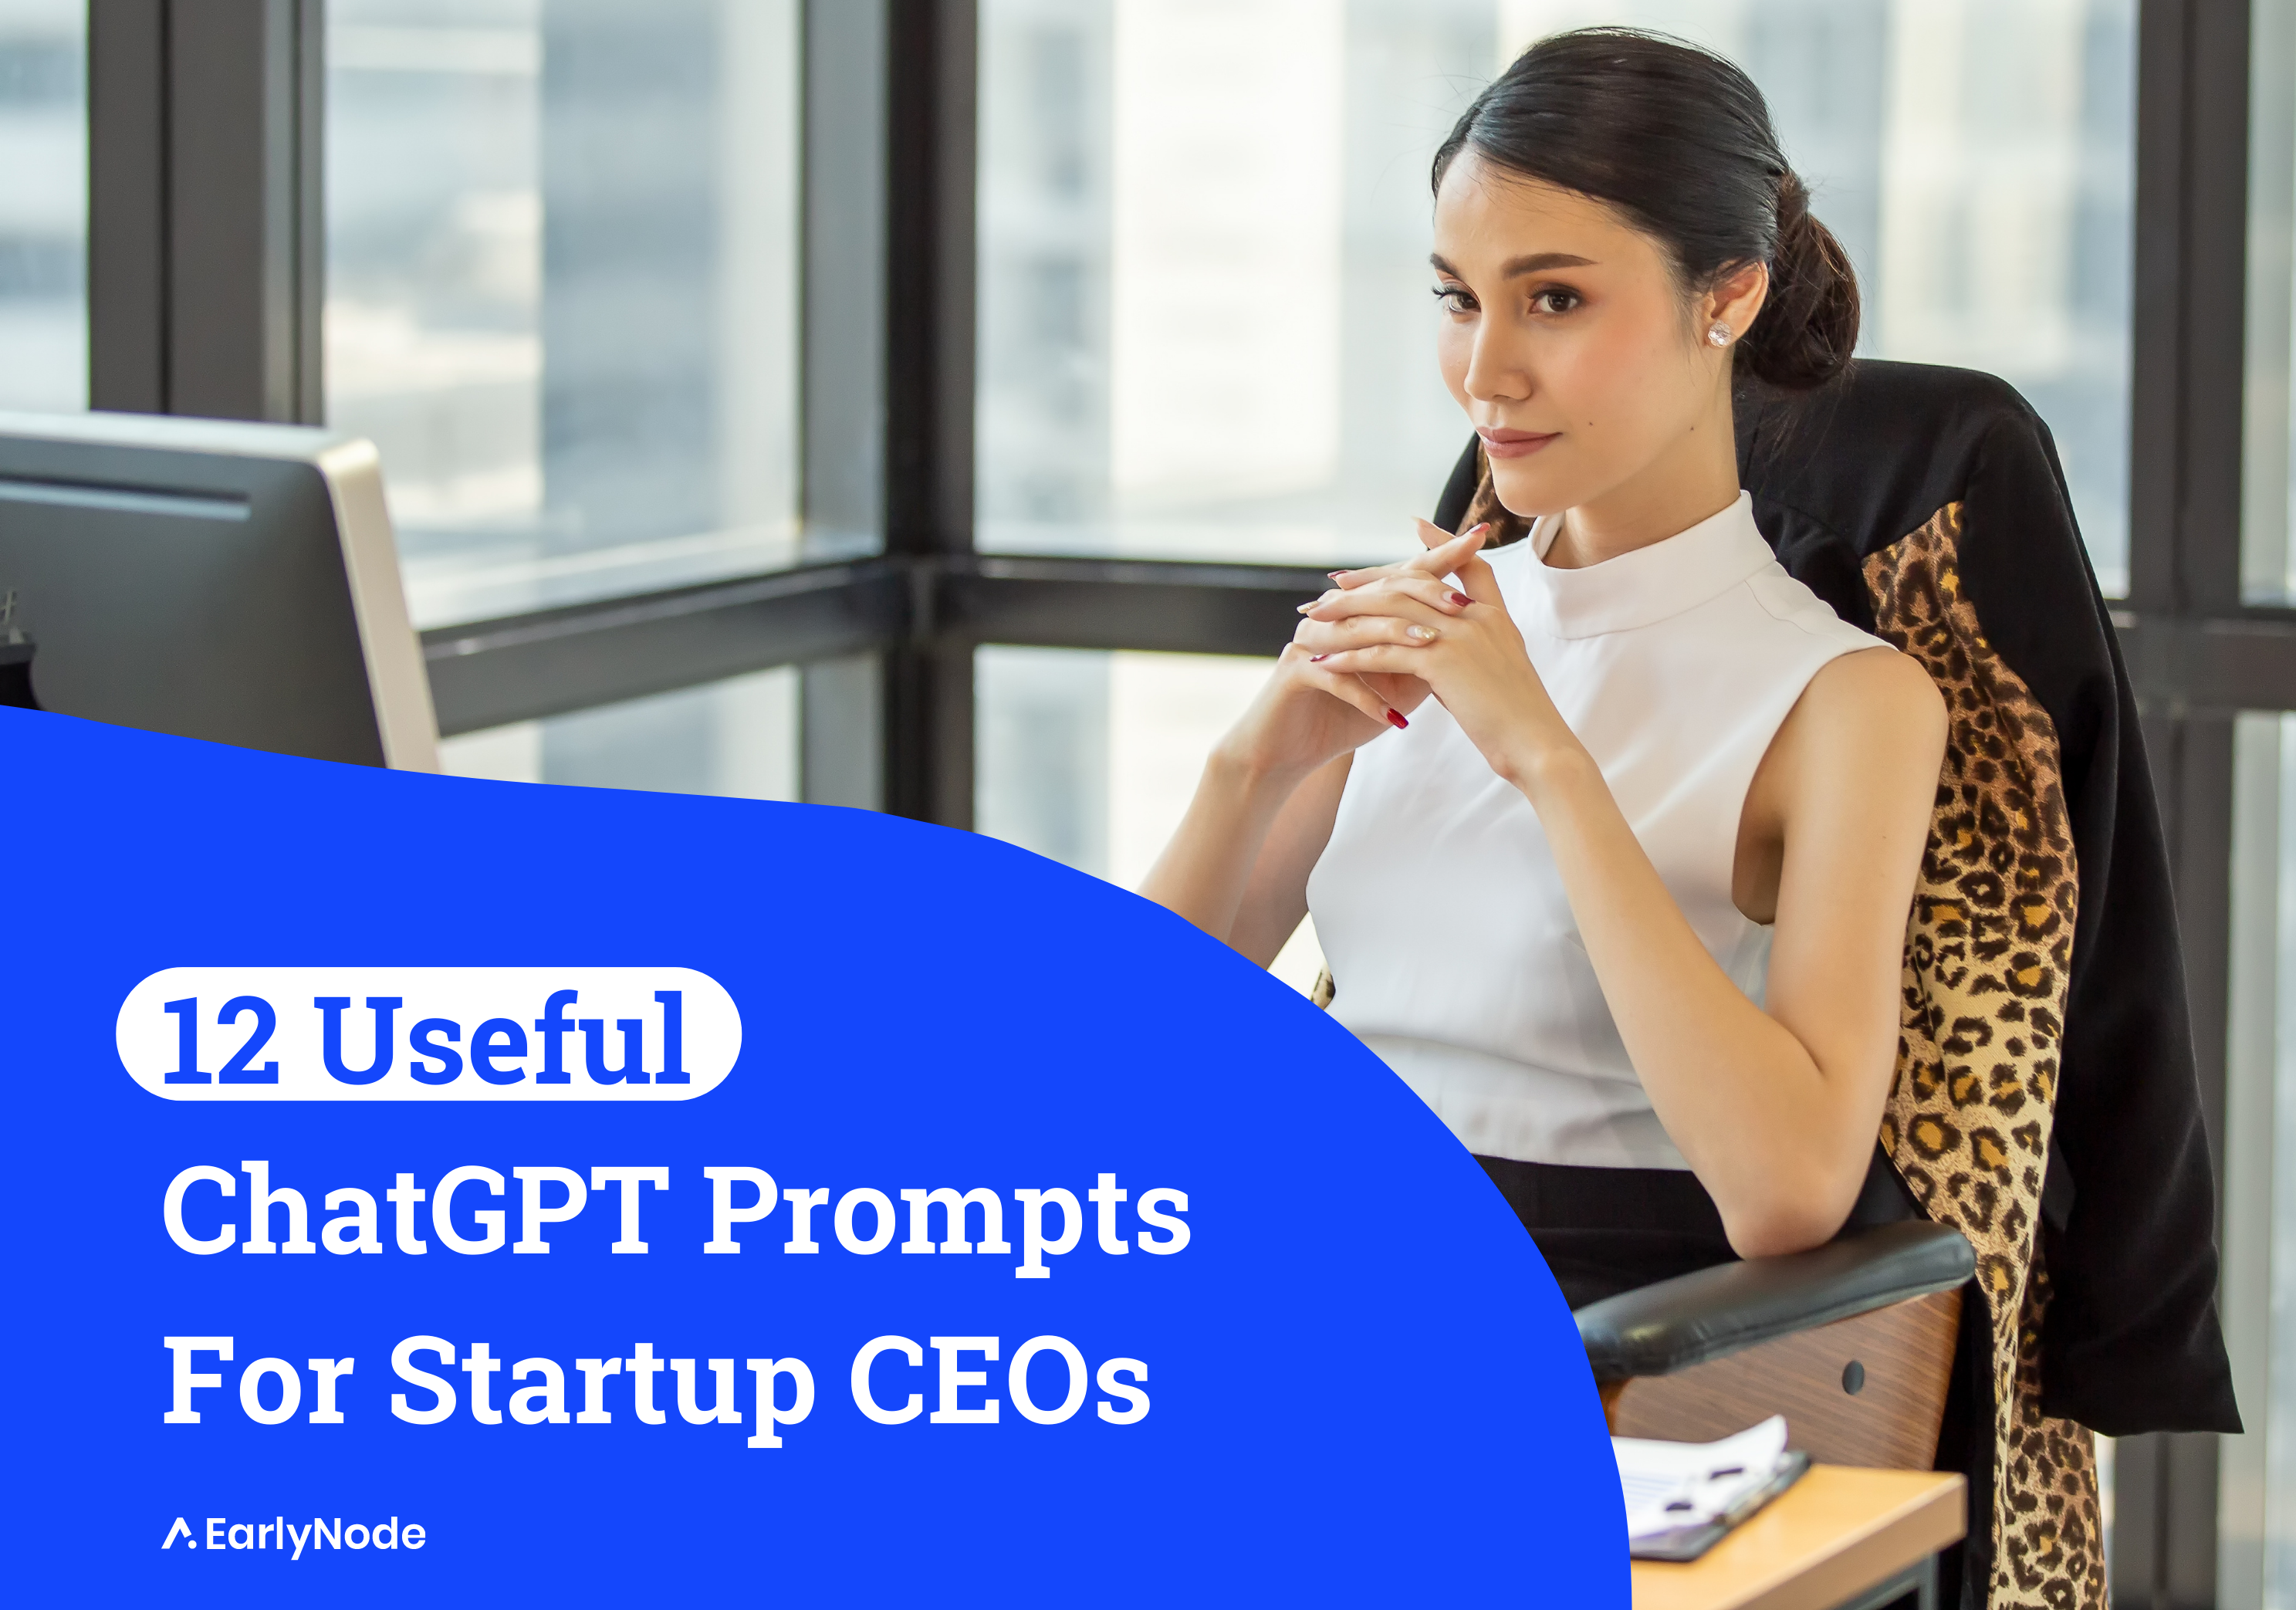 12 Useful ChatGPT Prompts for the CEO of a Startup